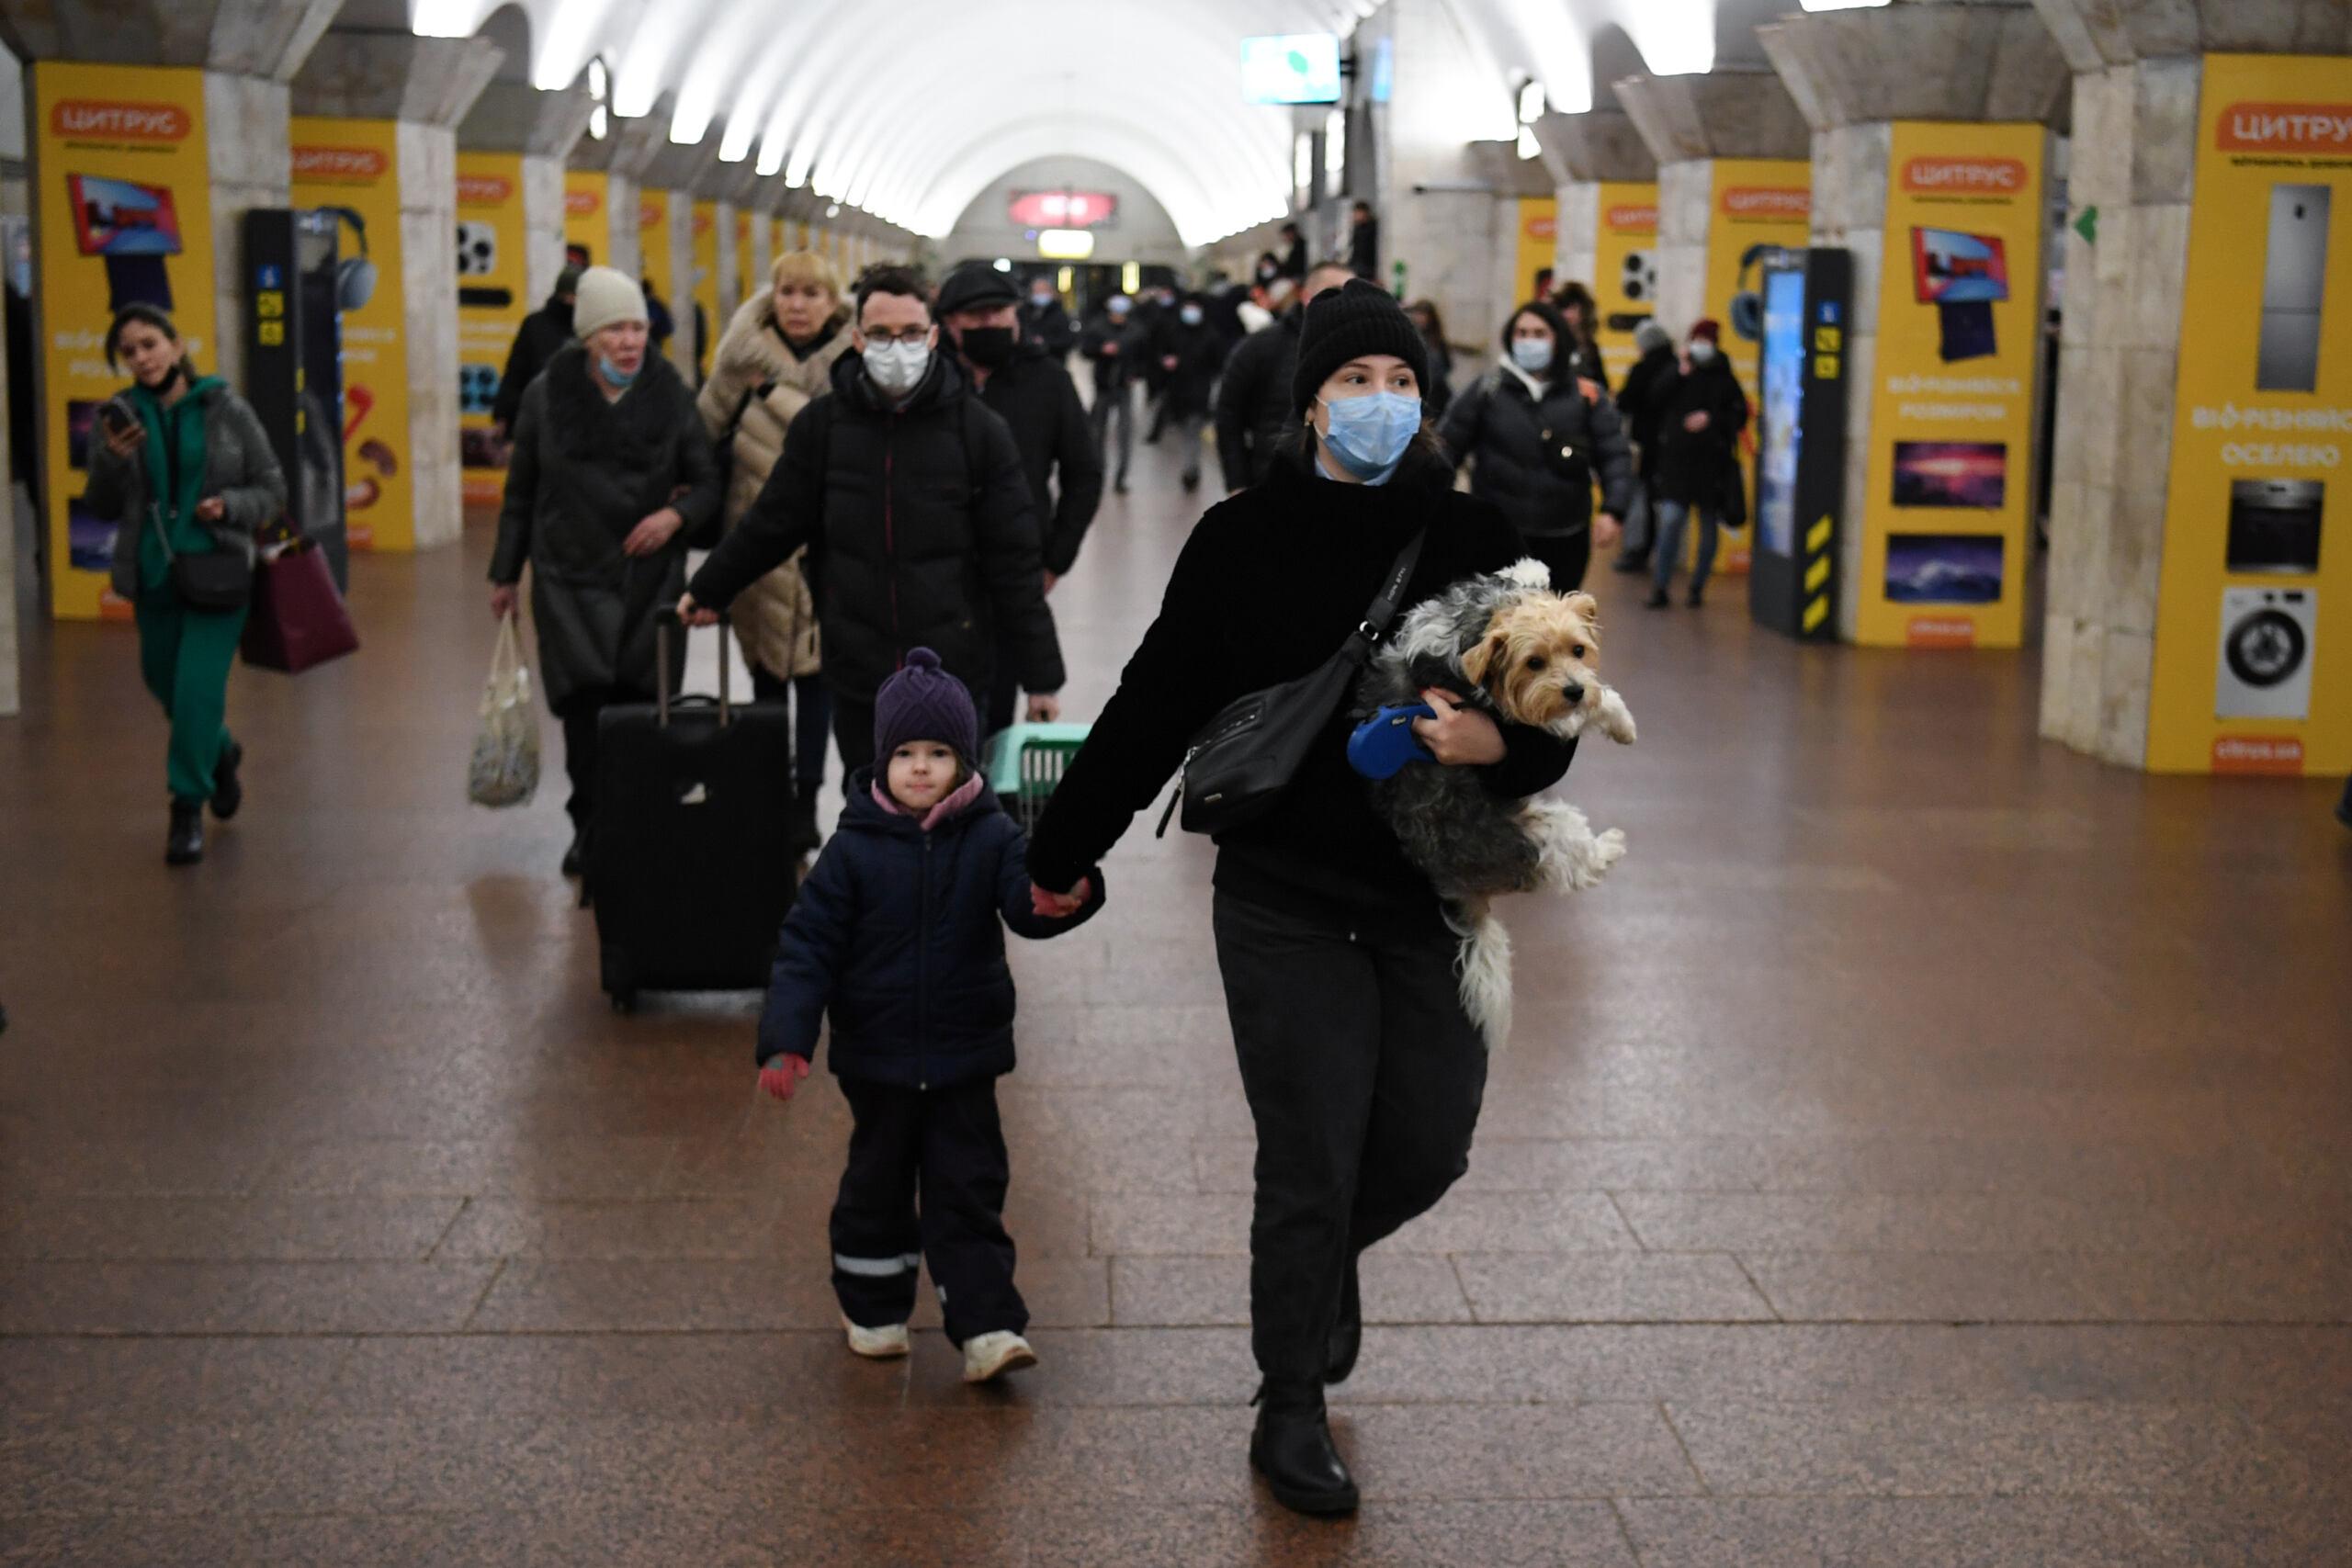 A woman with a child and a dog walks at a metro station in Kyiv early on February 24, 2022. - Russian President Vladimir Putin announced a military operation in Ukraine on Thursday with explosions heard soon after across the country and its foreign minister warning a "full-scale invasion" was underway. (Photo by Daniel LEAL / AFP)